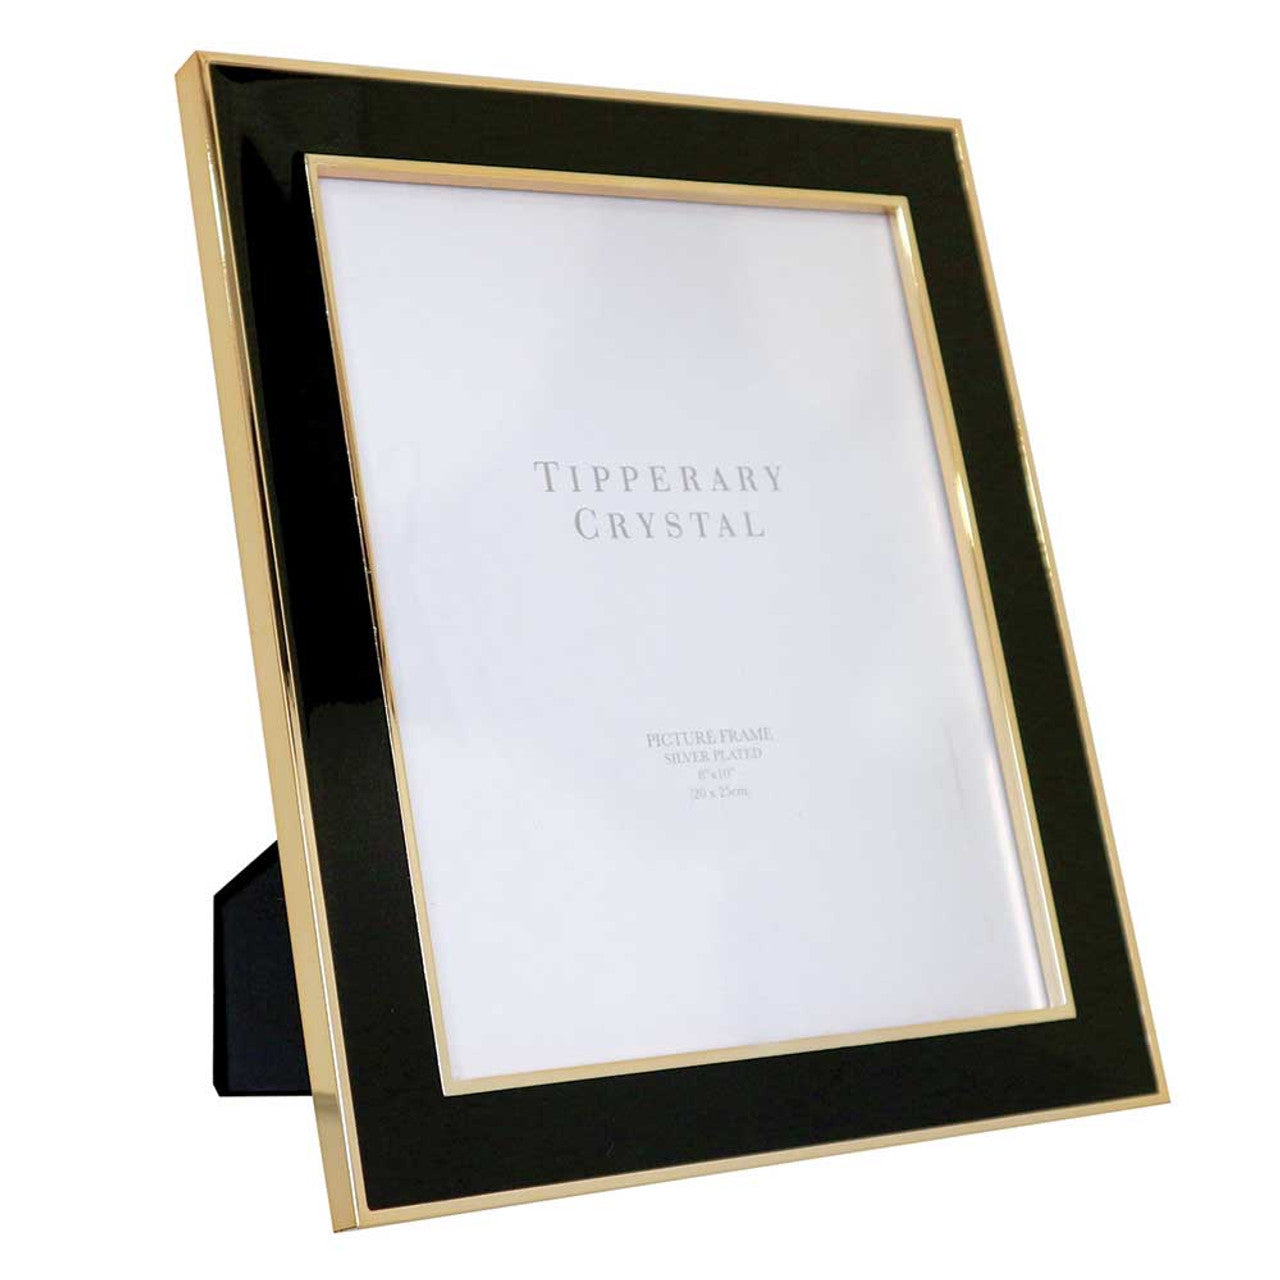 Fab Gifts | Tipperary Crystal Black Enamel Frame W/Rose 8x10" by Weirs of Baggot Street